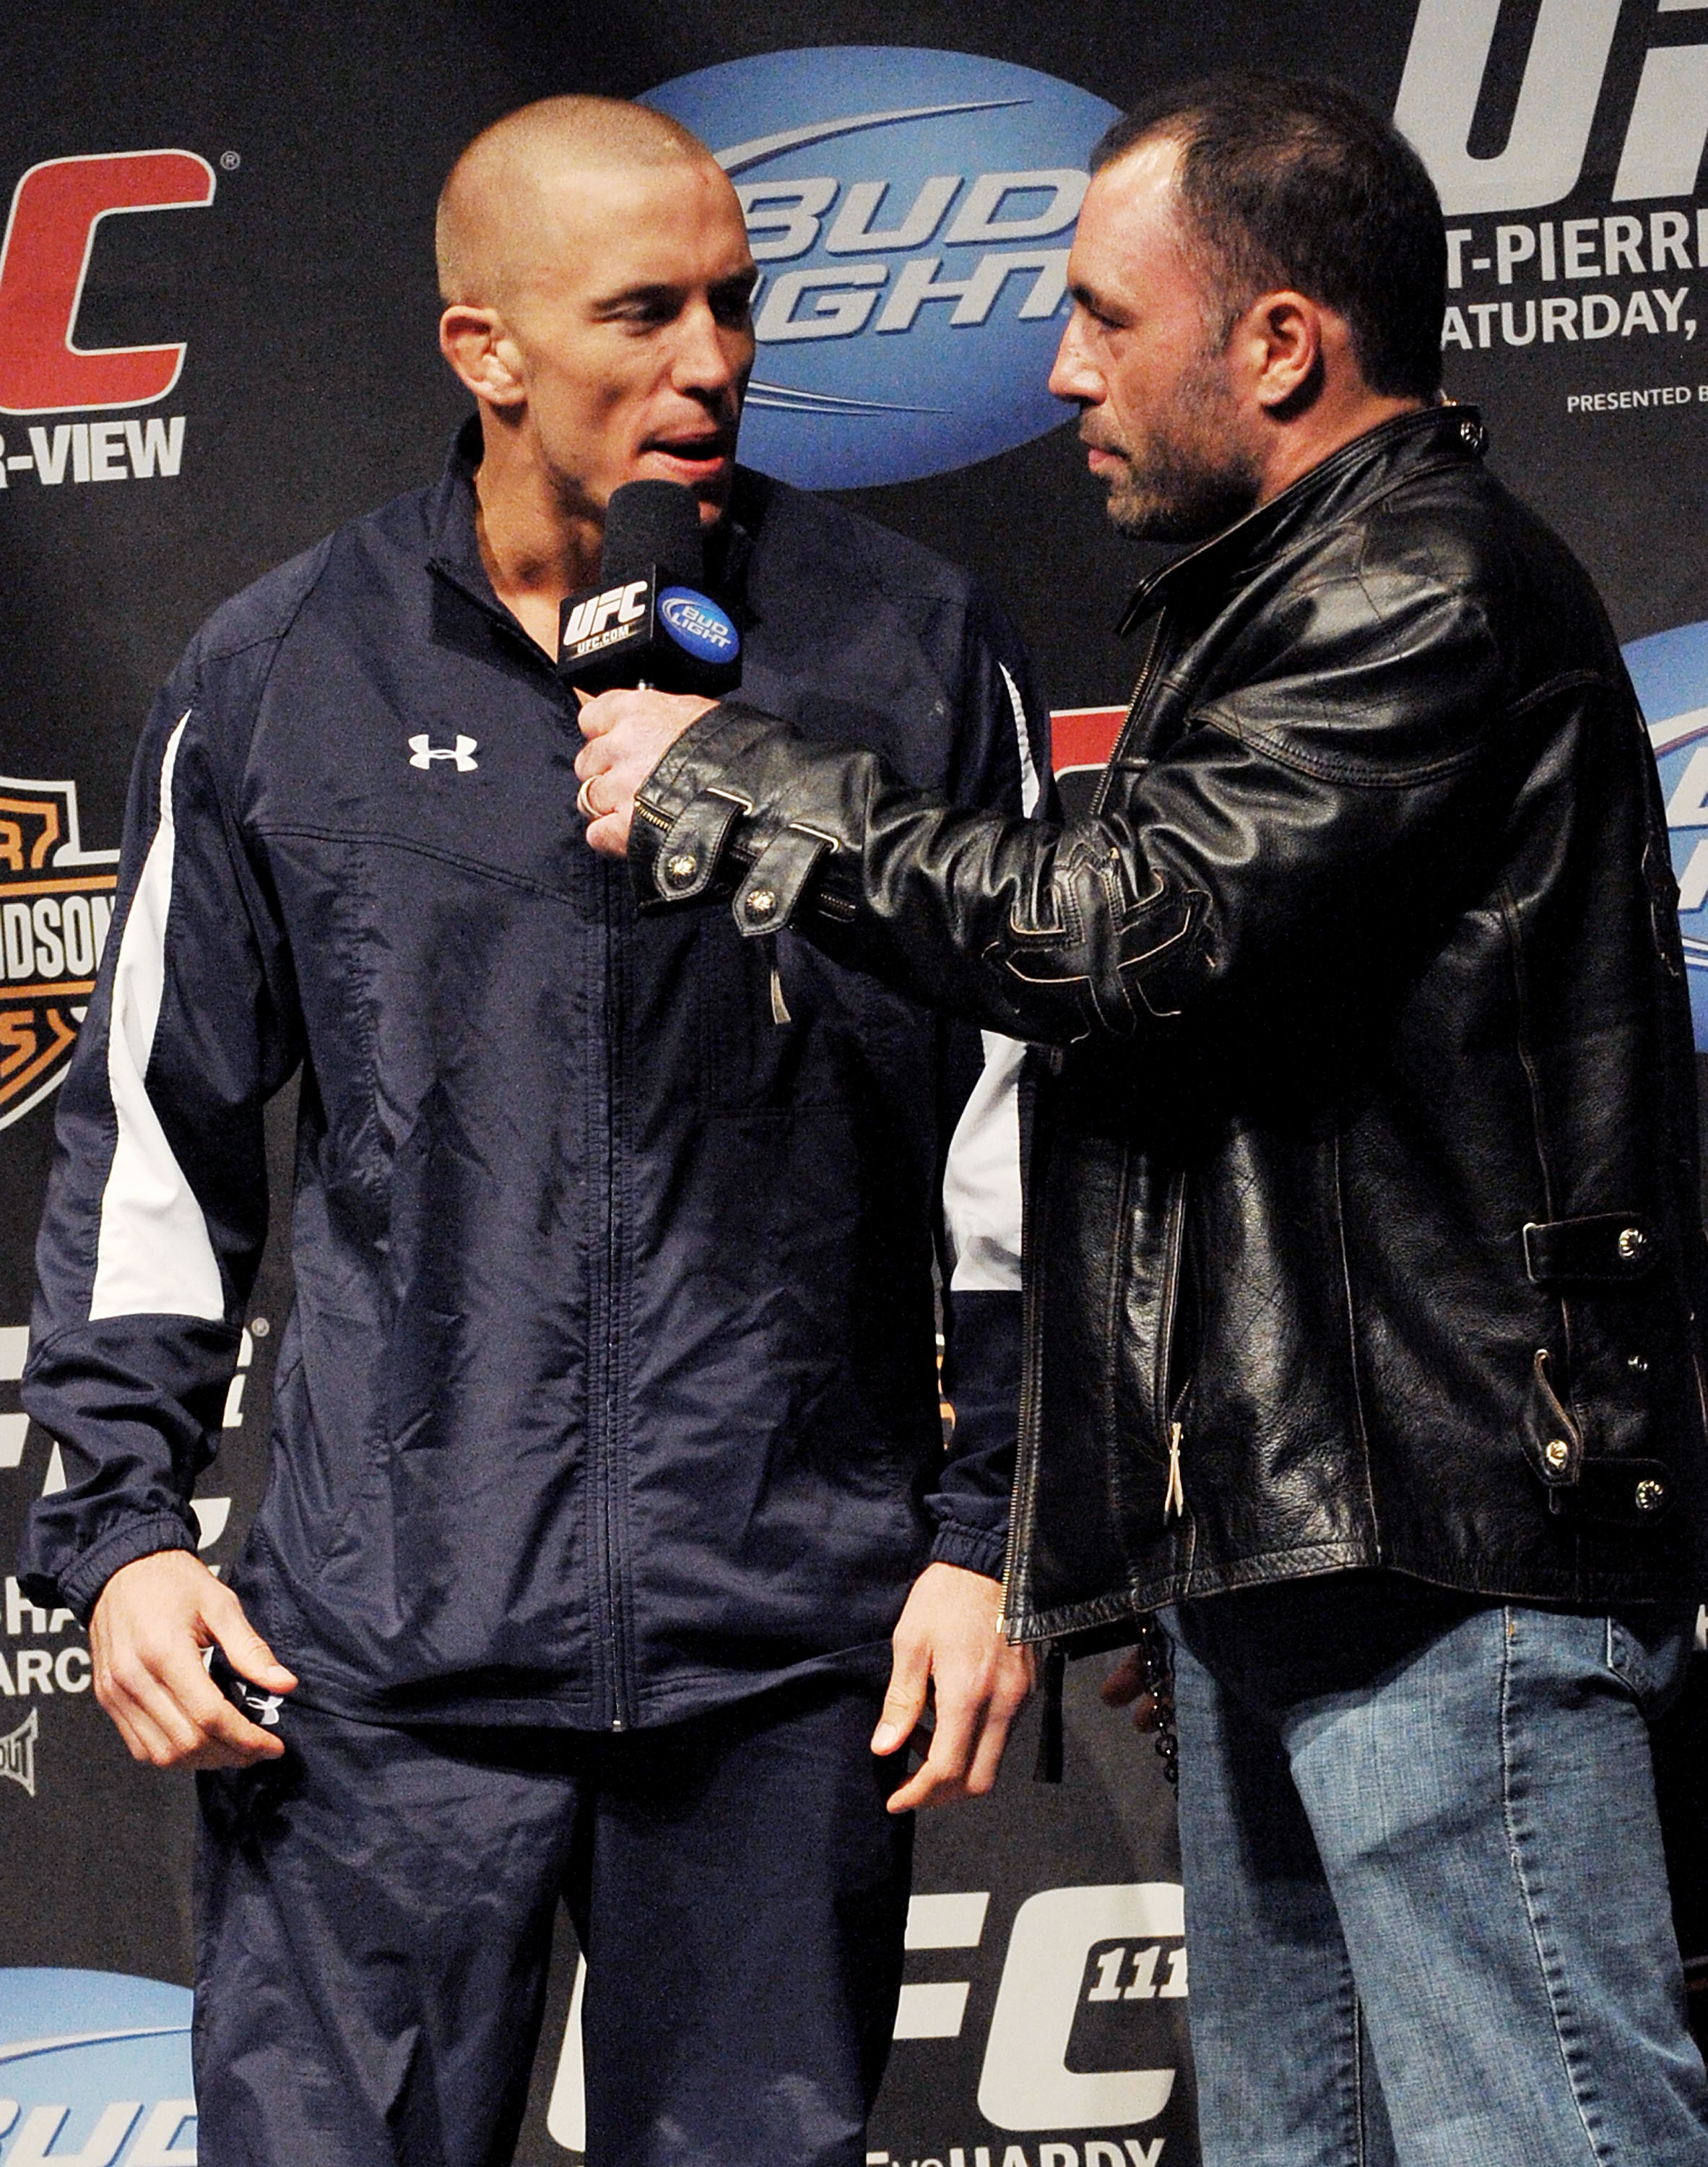 Georges St-Pierre and Joe Rogan conduct an interview during the UFC 111: St-Pierre v Hardy Weigh-In